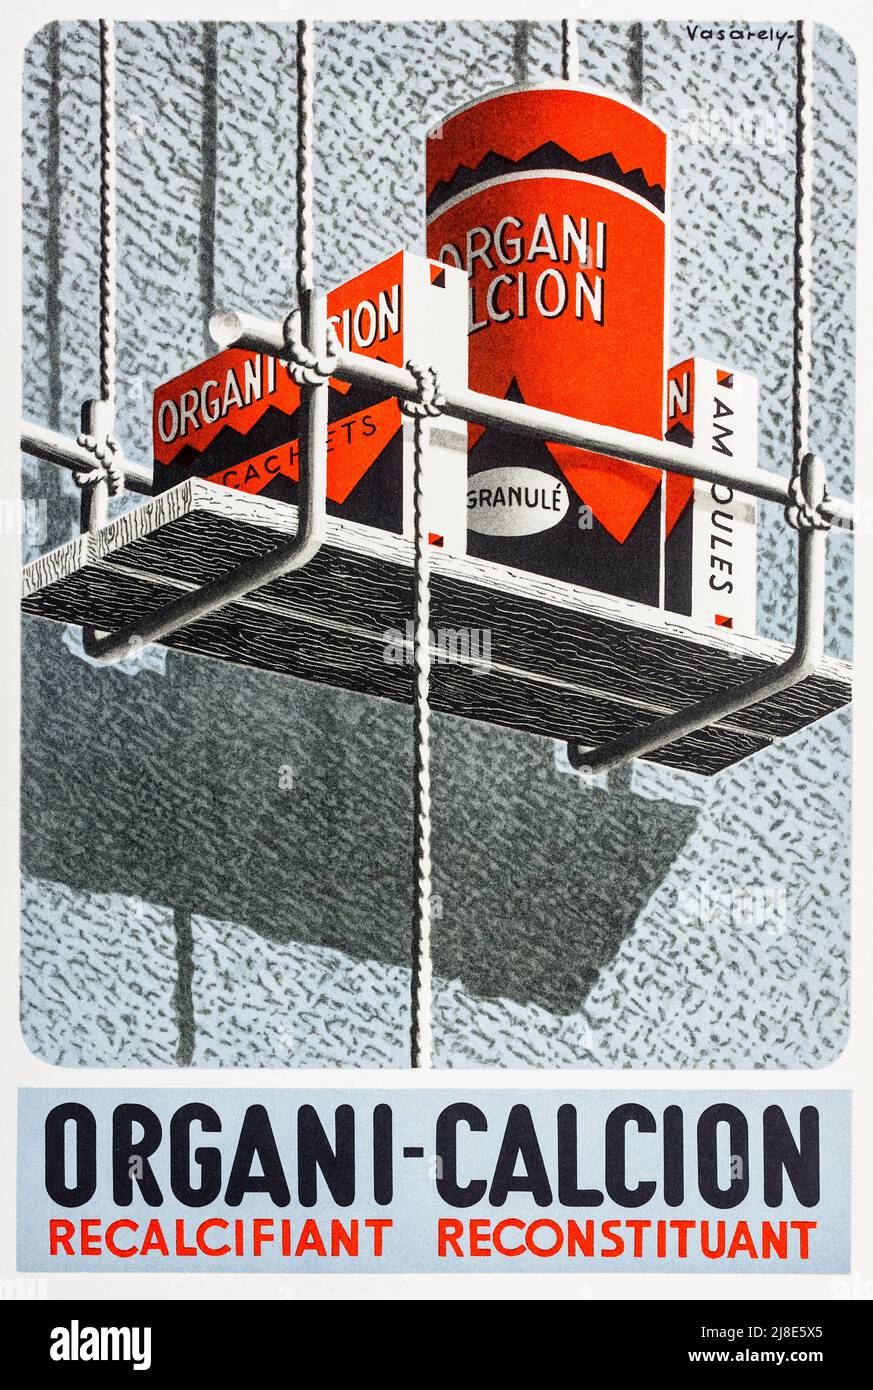 1930s French advert for 'Organi-Calcion' dietary supplement for calcium deficiency, illustrated by Victor Vasarely. Stock Photo